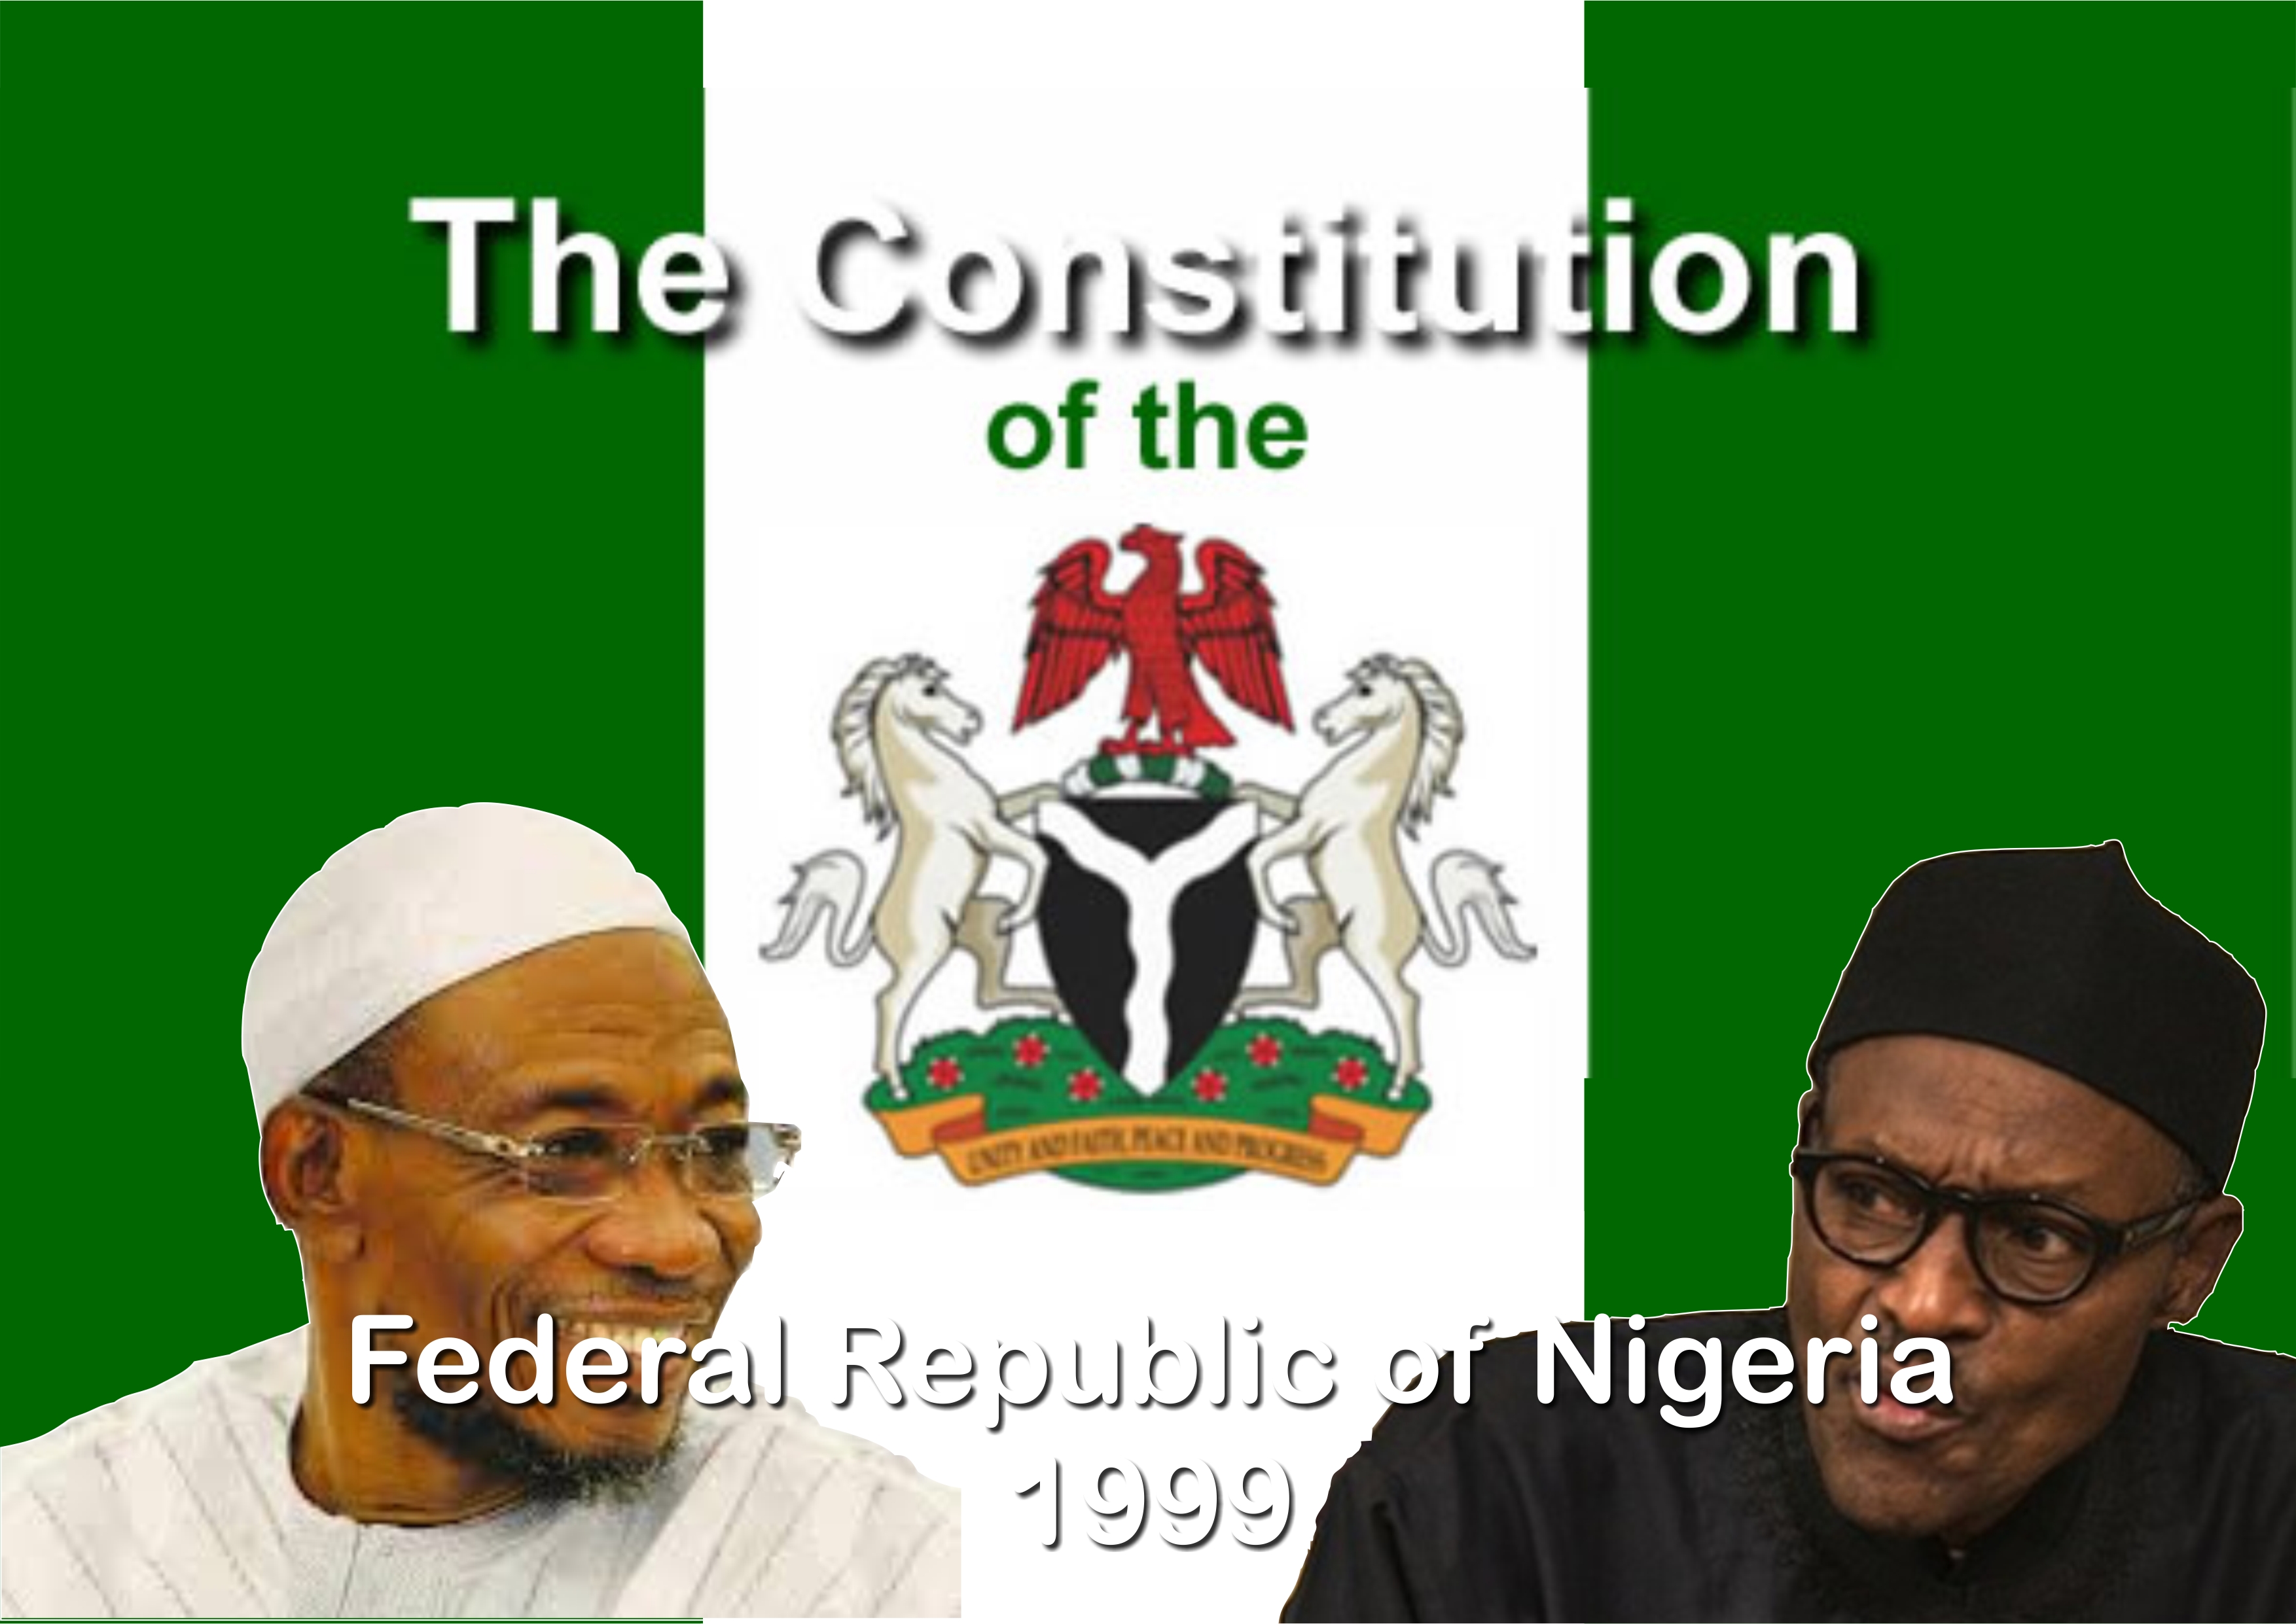 MEMORANDUM OF THE STATE OF OSUN ON THE REVIEW OF THE 1999 CONSTITUTION OF THE FEDERAL REPUBLIC OF NIGERIA